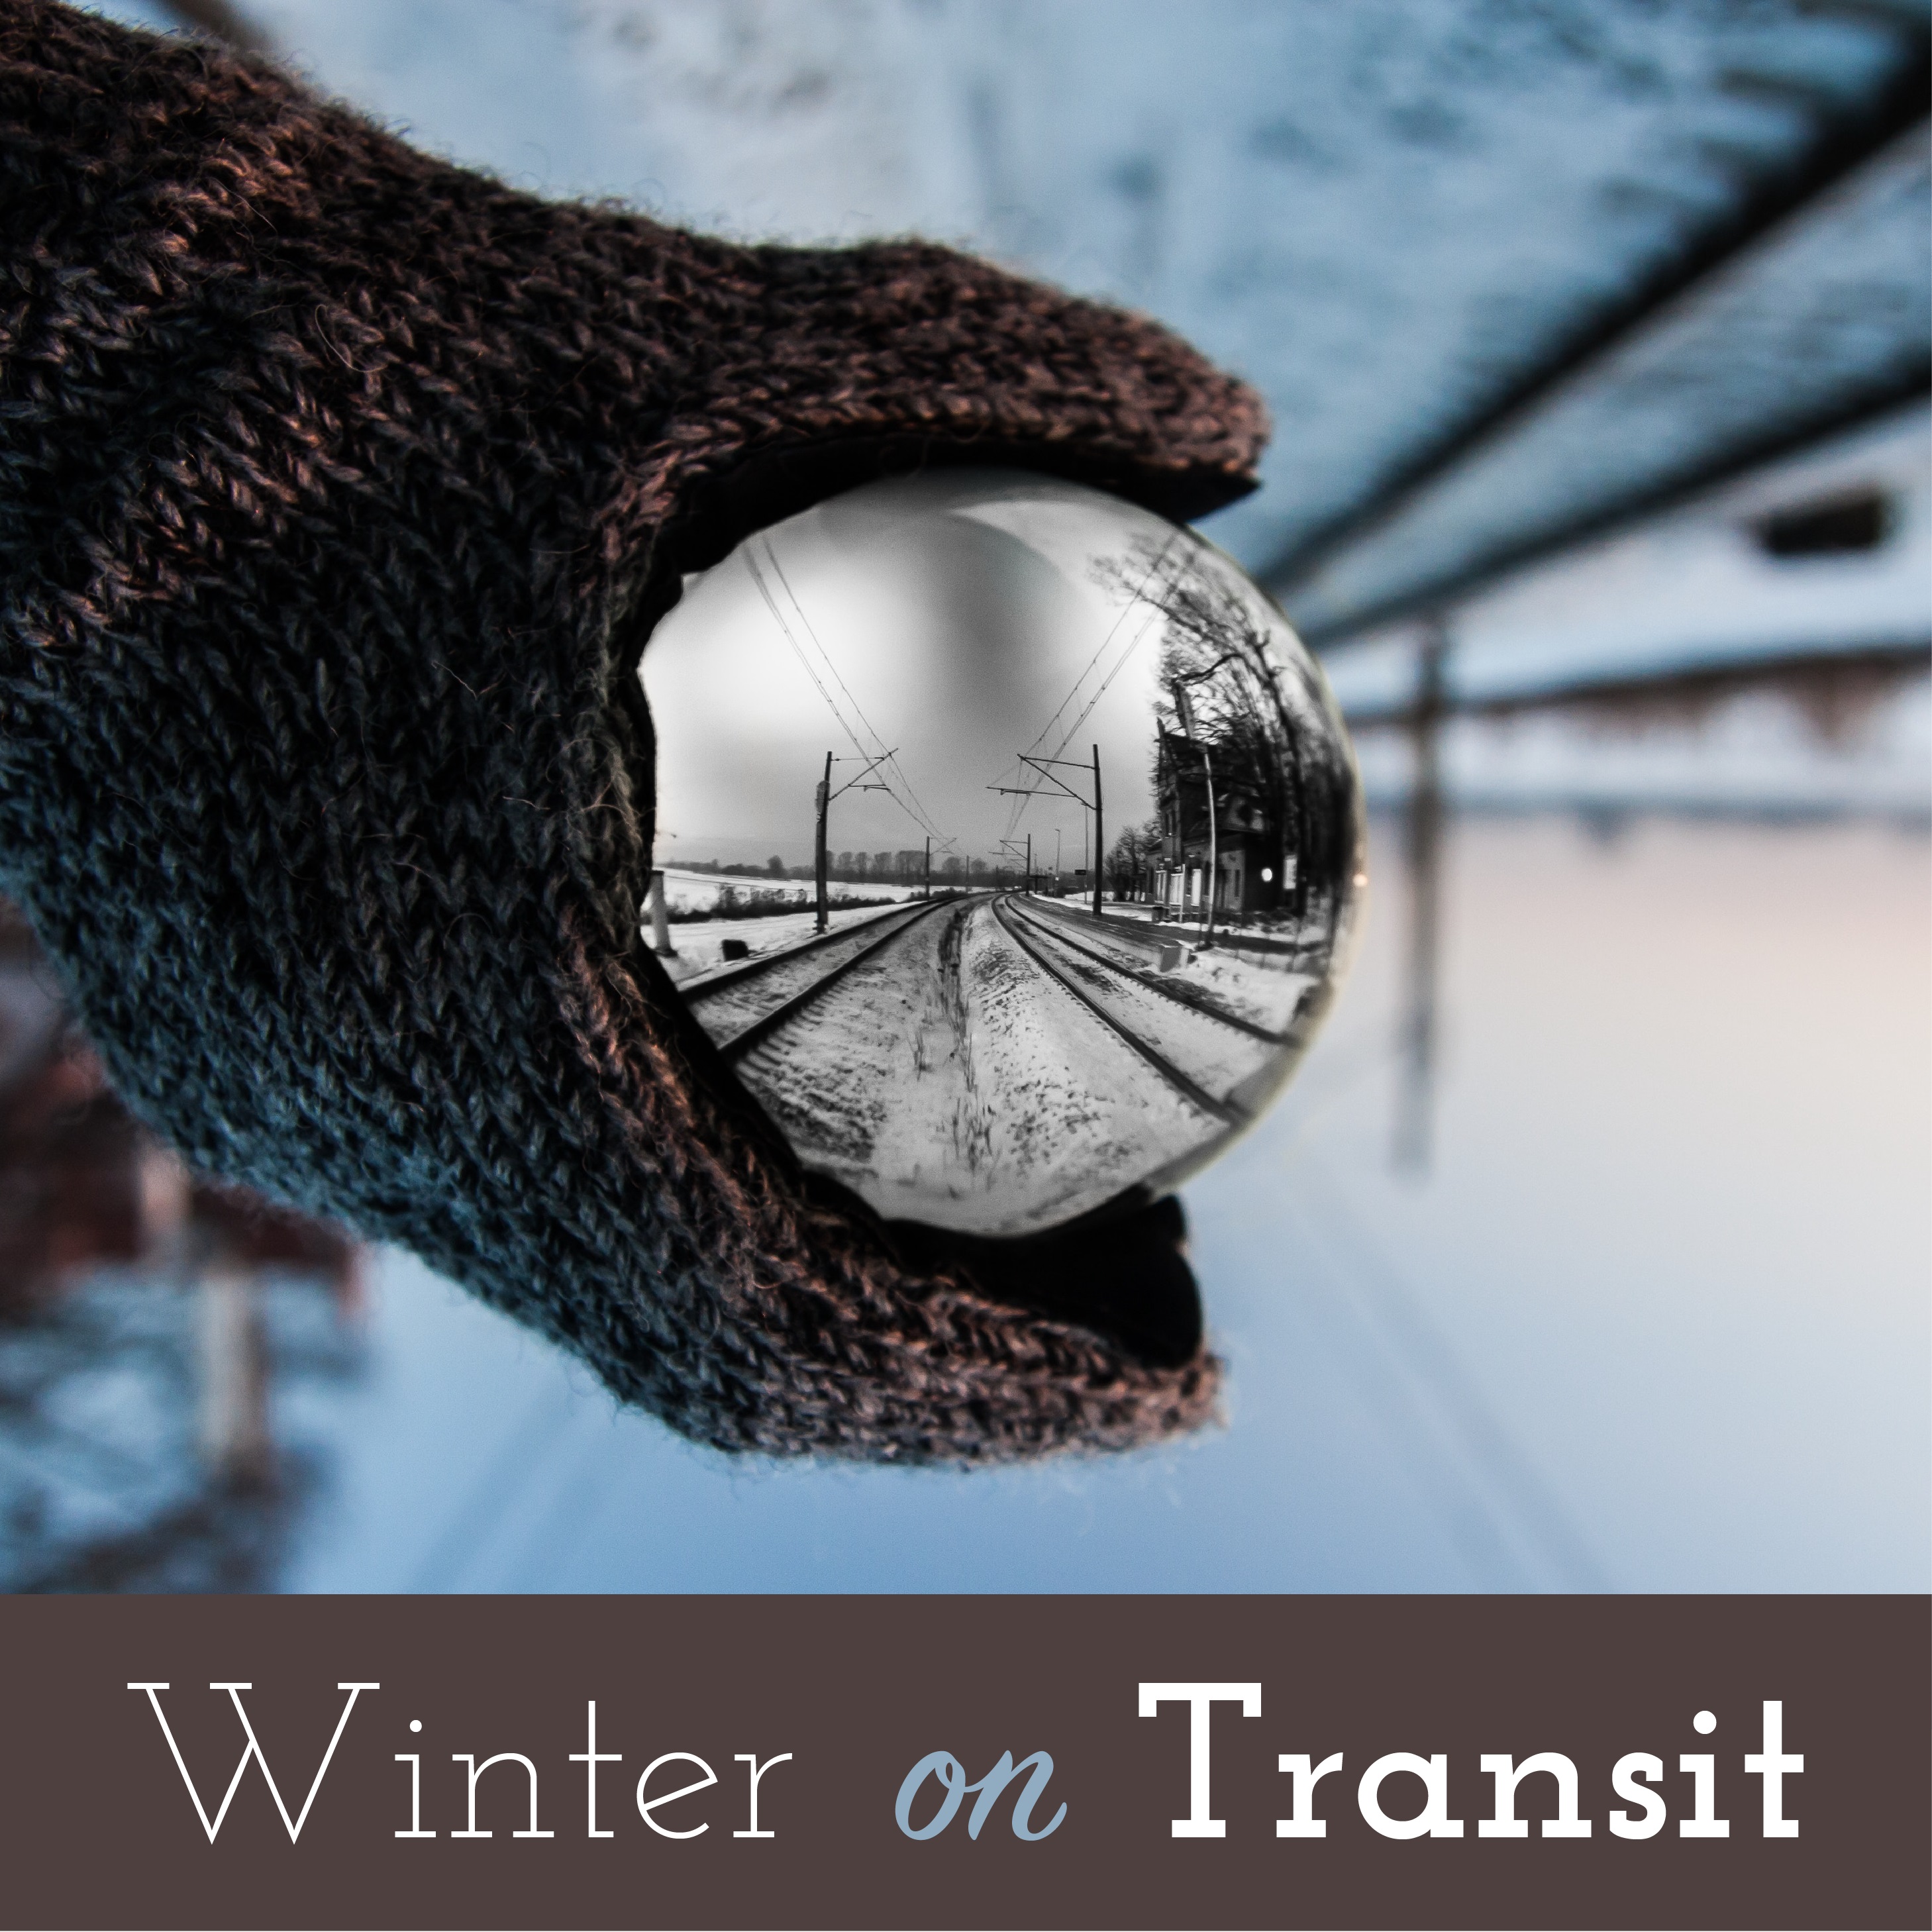 Transit Must-Have Items During the Winter Season